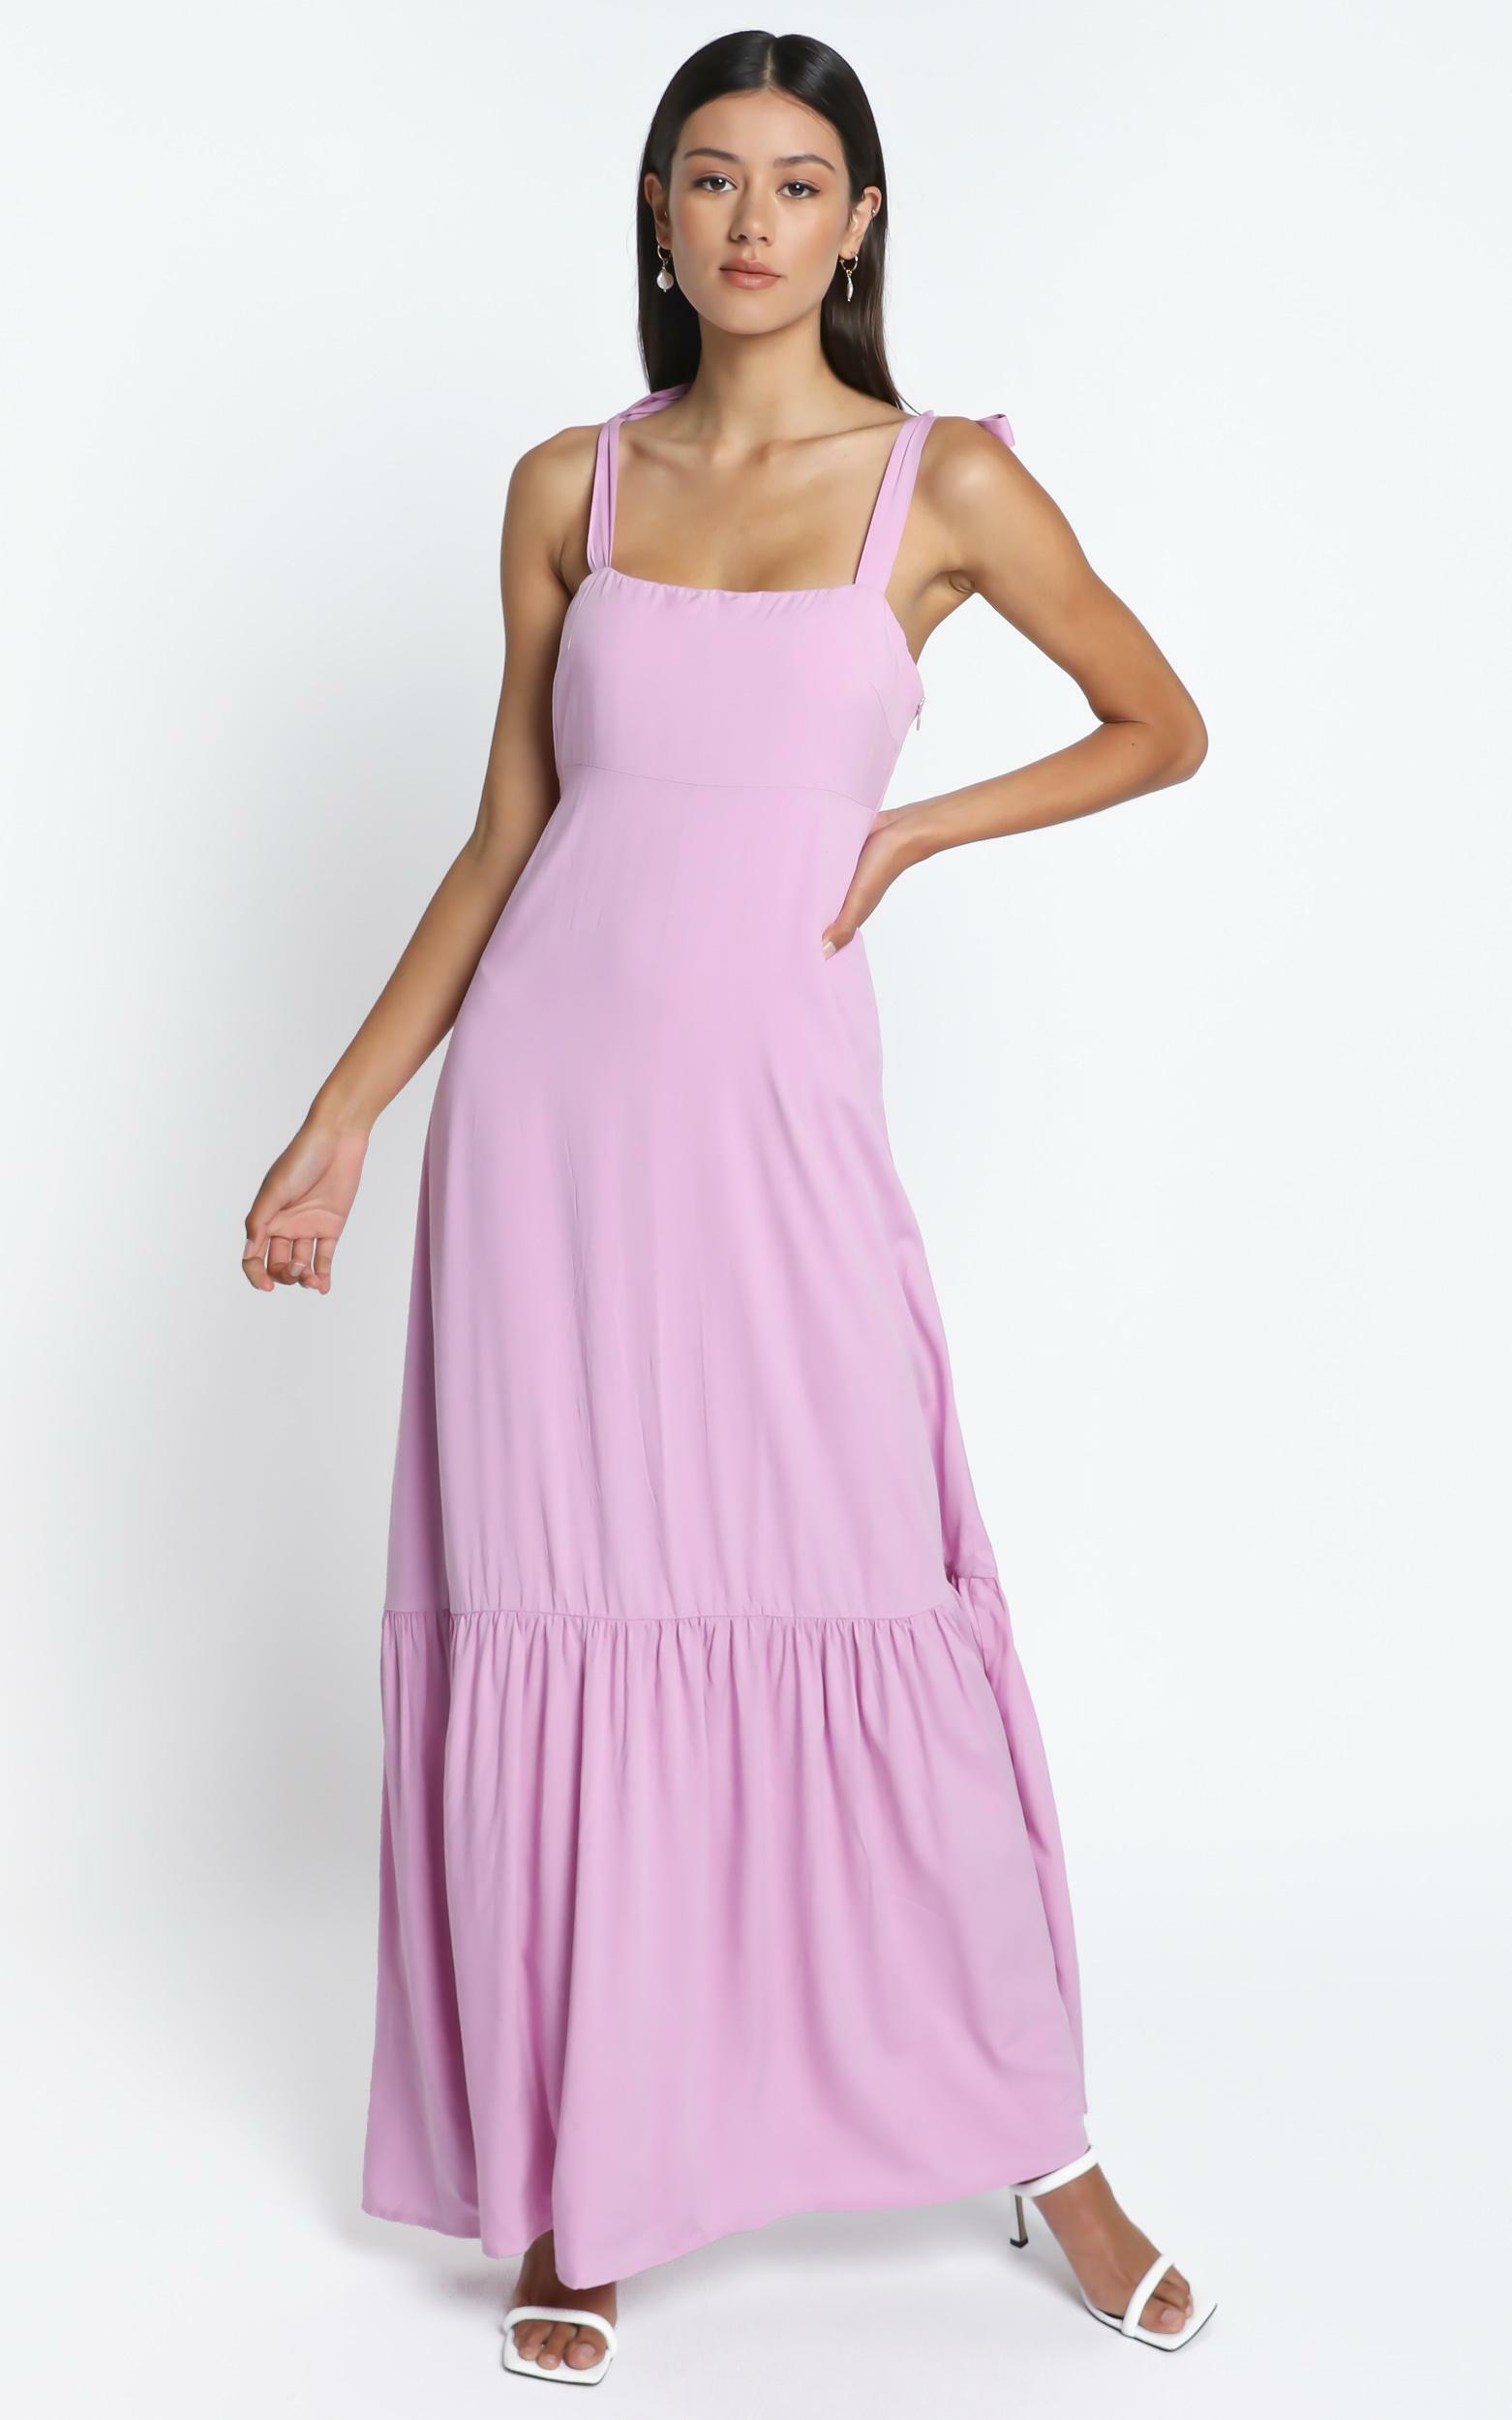 Honor Dress in Lilac - 14 (XL), Purple, hi-res image number null